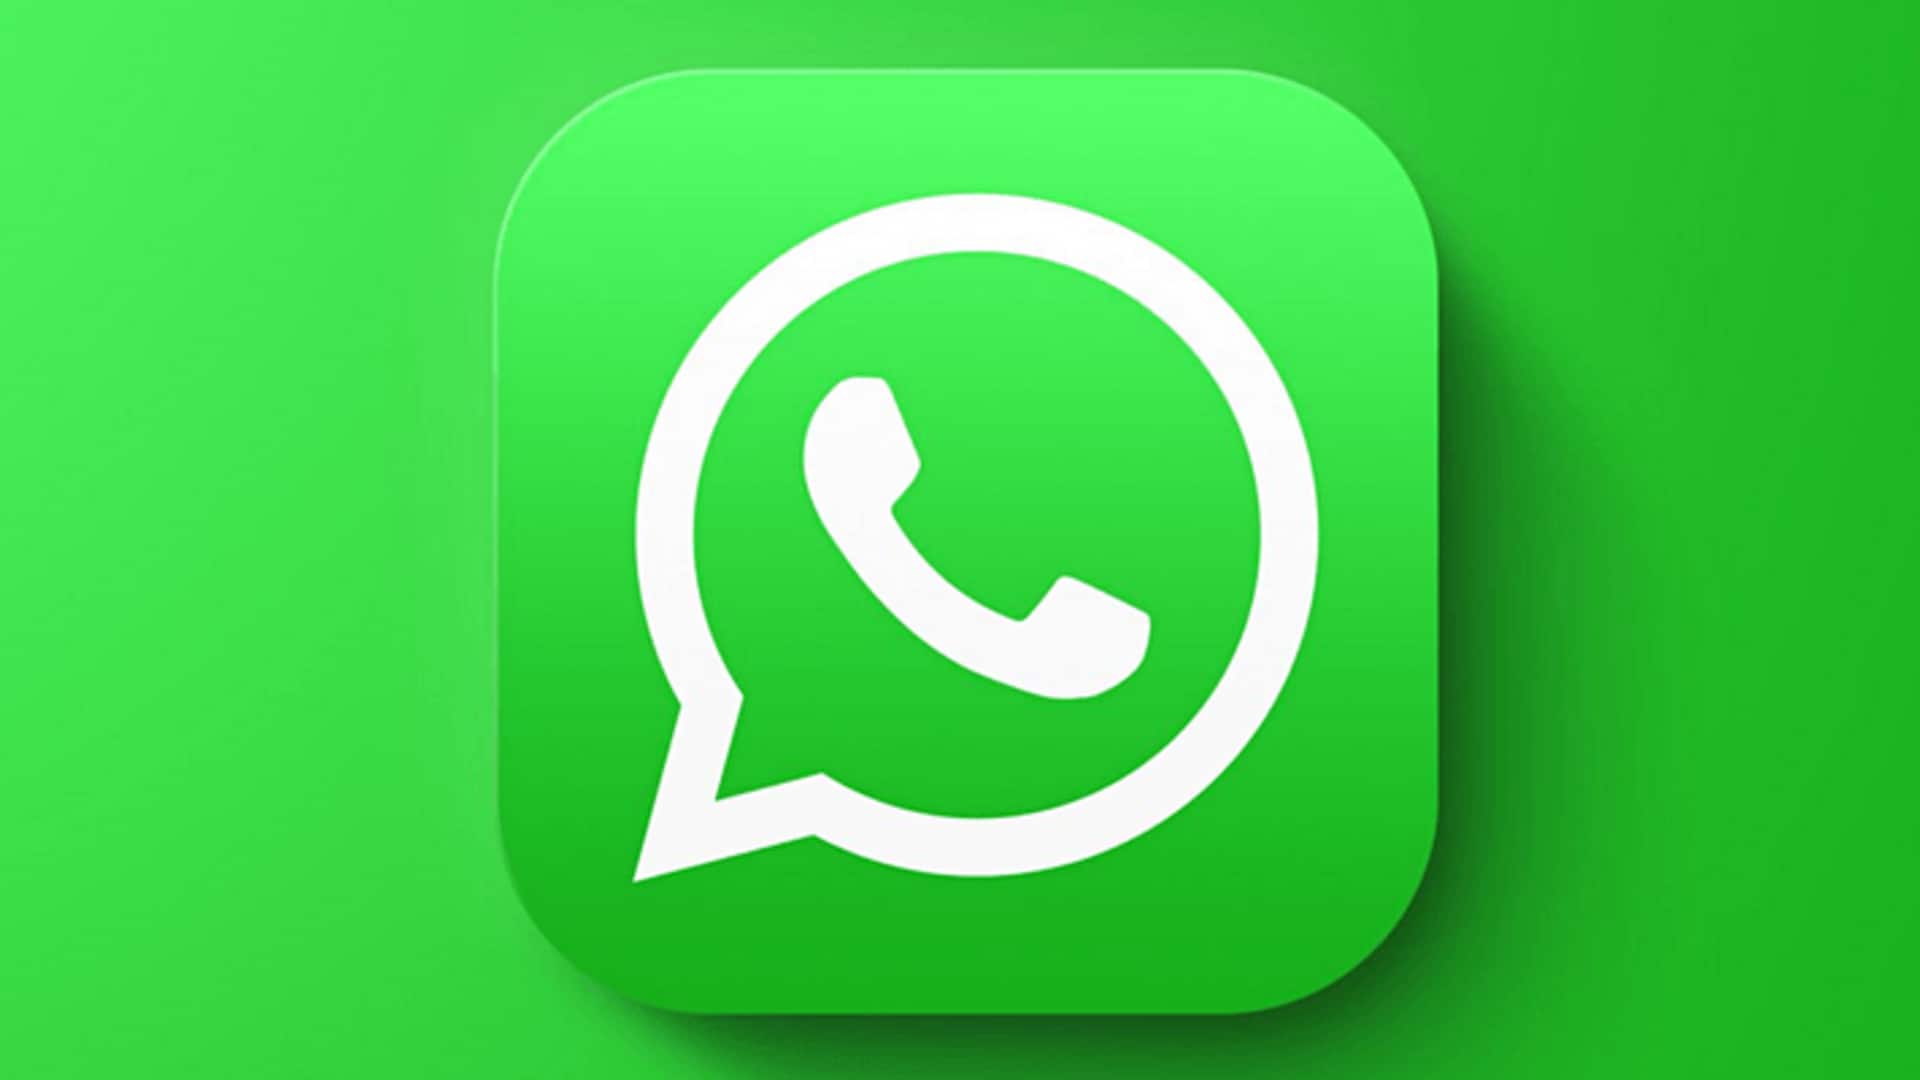 WhatsApp's latest update for iOS fixes the notifications bug